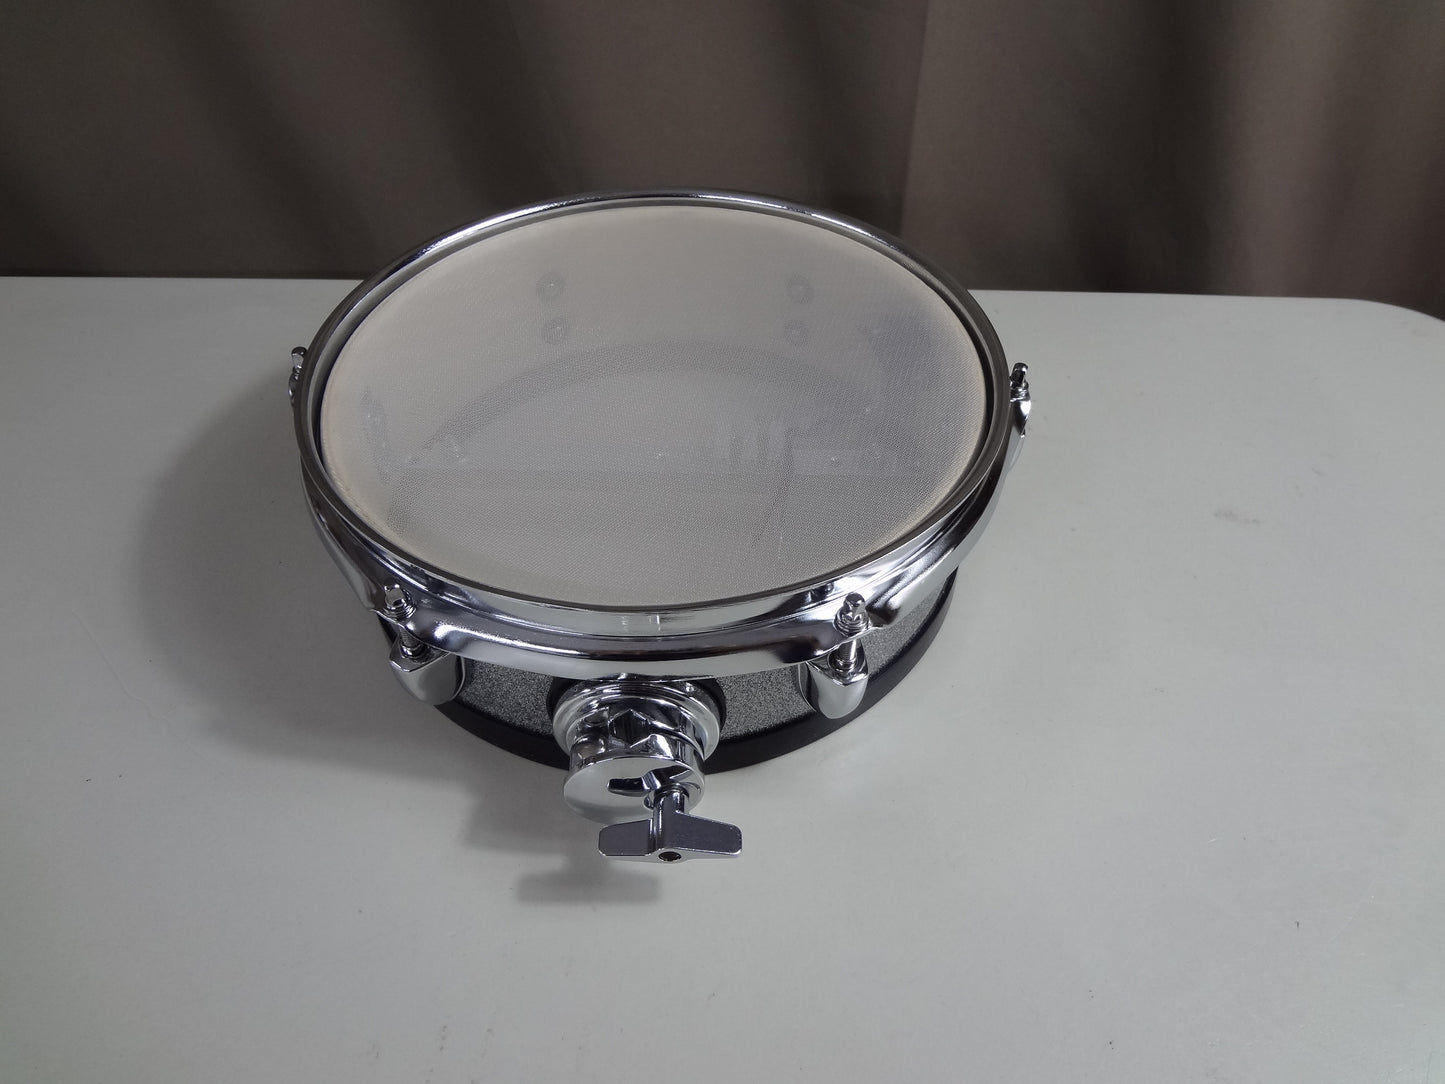 Refurbished 10 Inch Custom Electronic Snare Drum - Silver Glitter